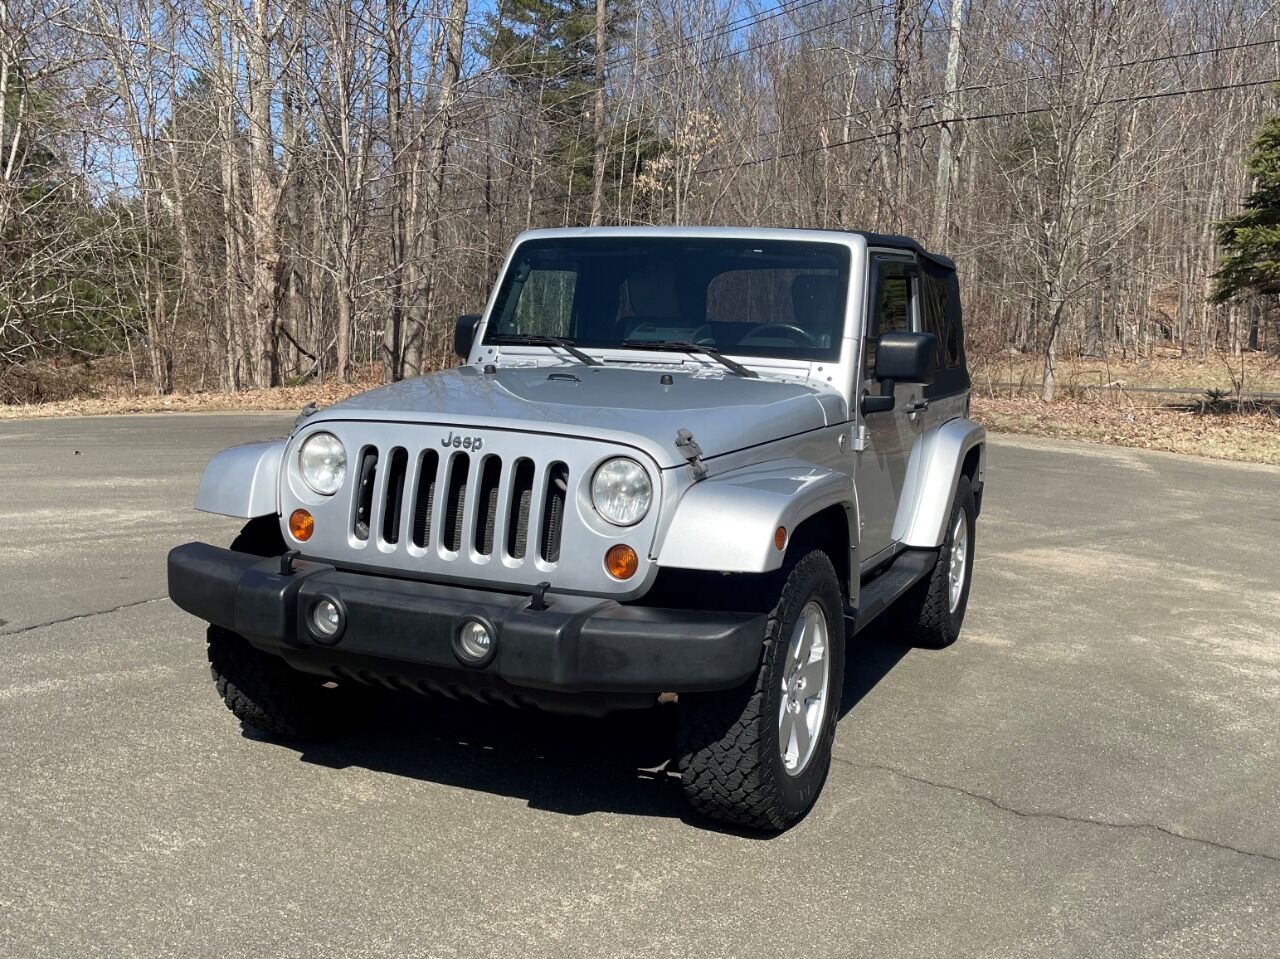 2007 Jeep Wrangler For Sale ®